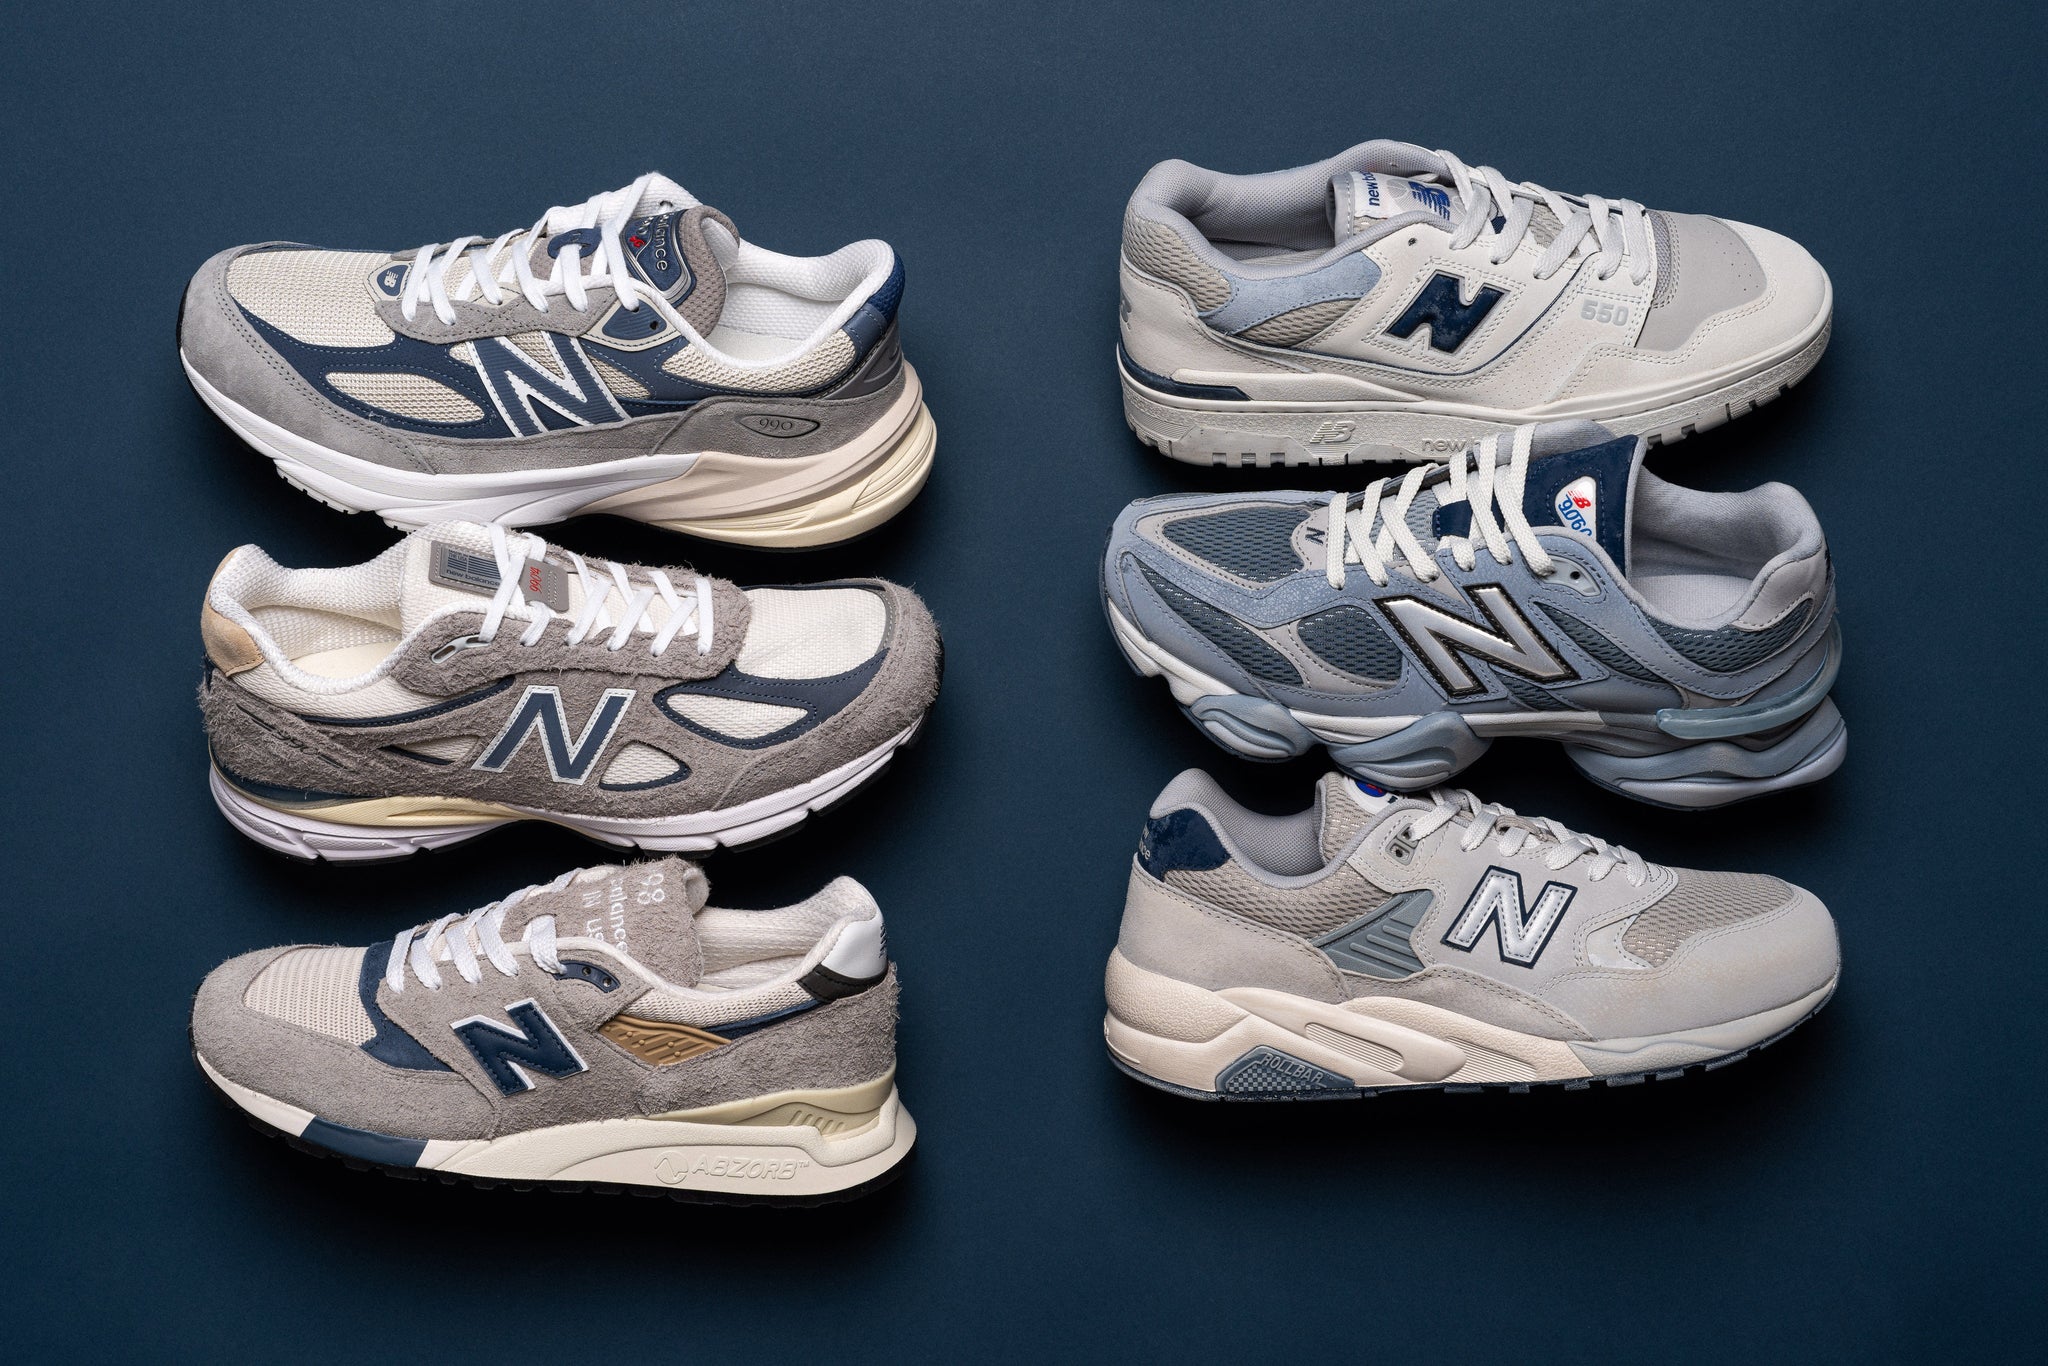 New Balance MADE in USA 'Moon Daze' Collection 12/5/23 – Capsule